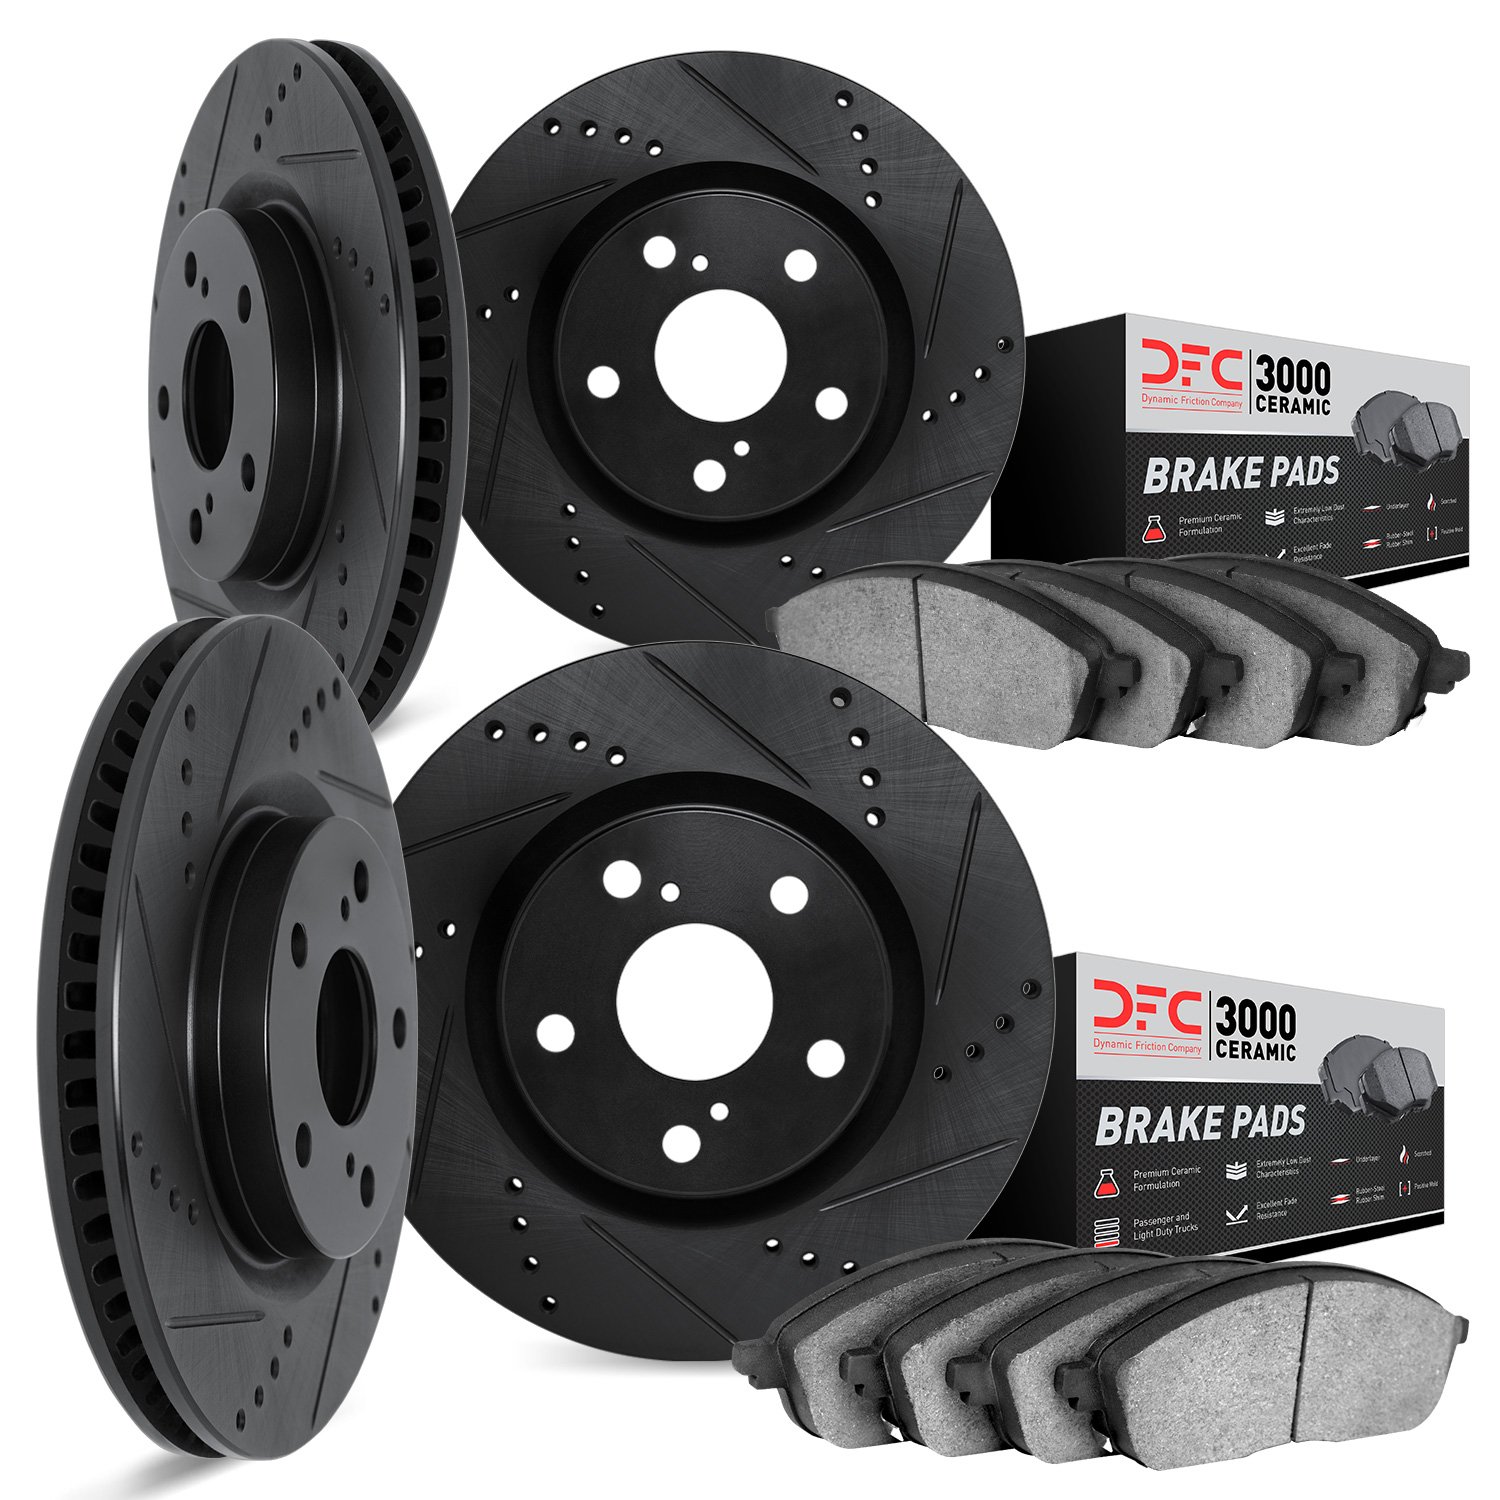 8304-31035 Drilled/Slotted Brake Rotors with 3000-Series Ceramic Brake Pads Kit [Black], 2003-2008 BMW, Position: Front and Rear